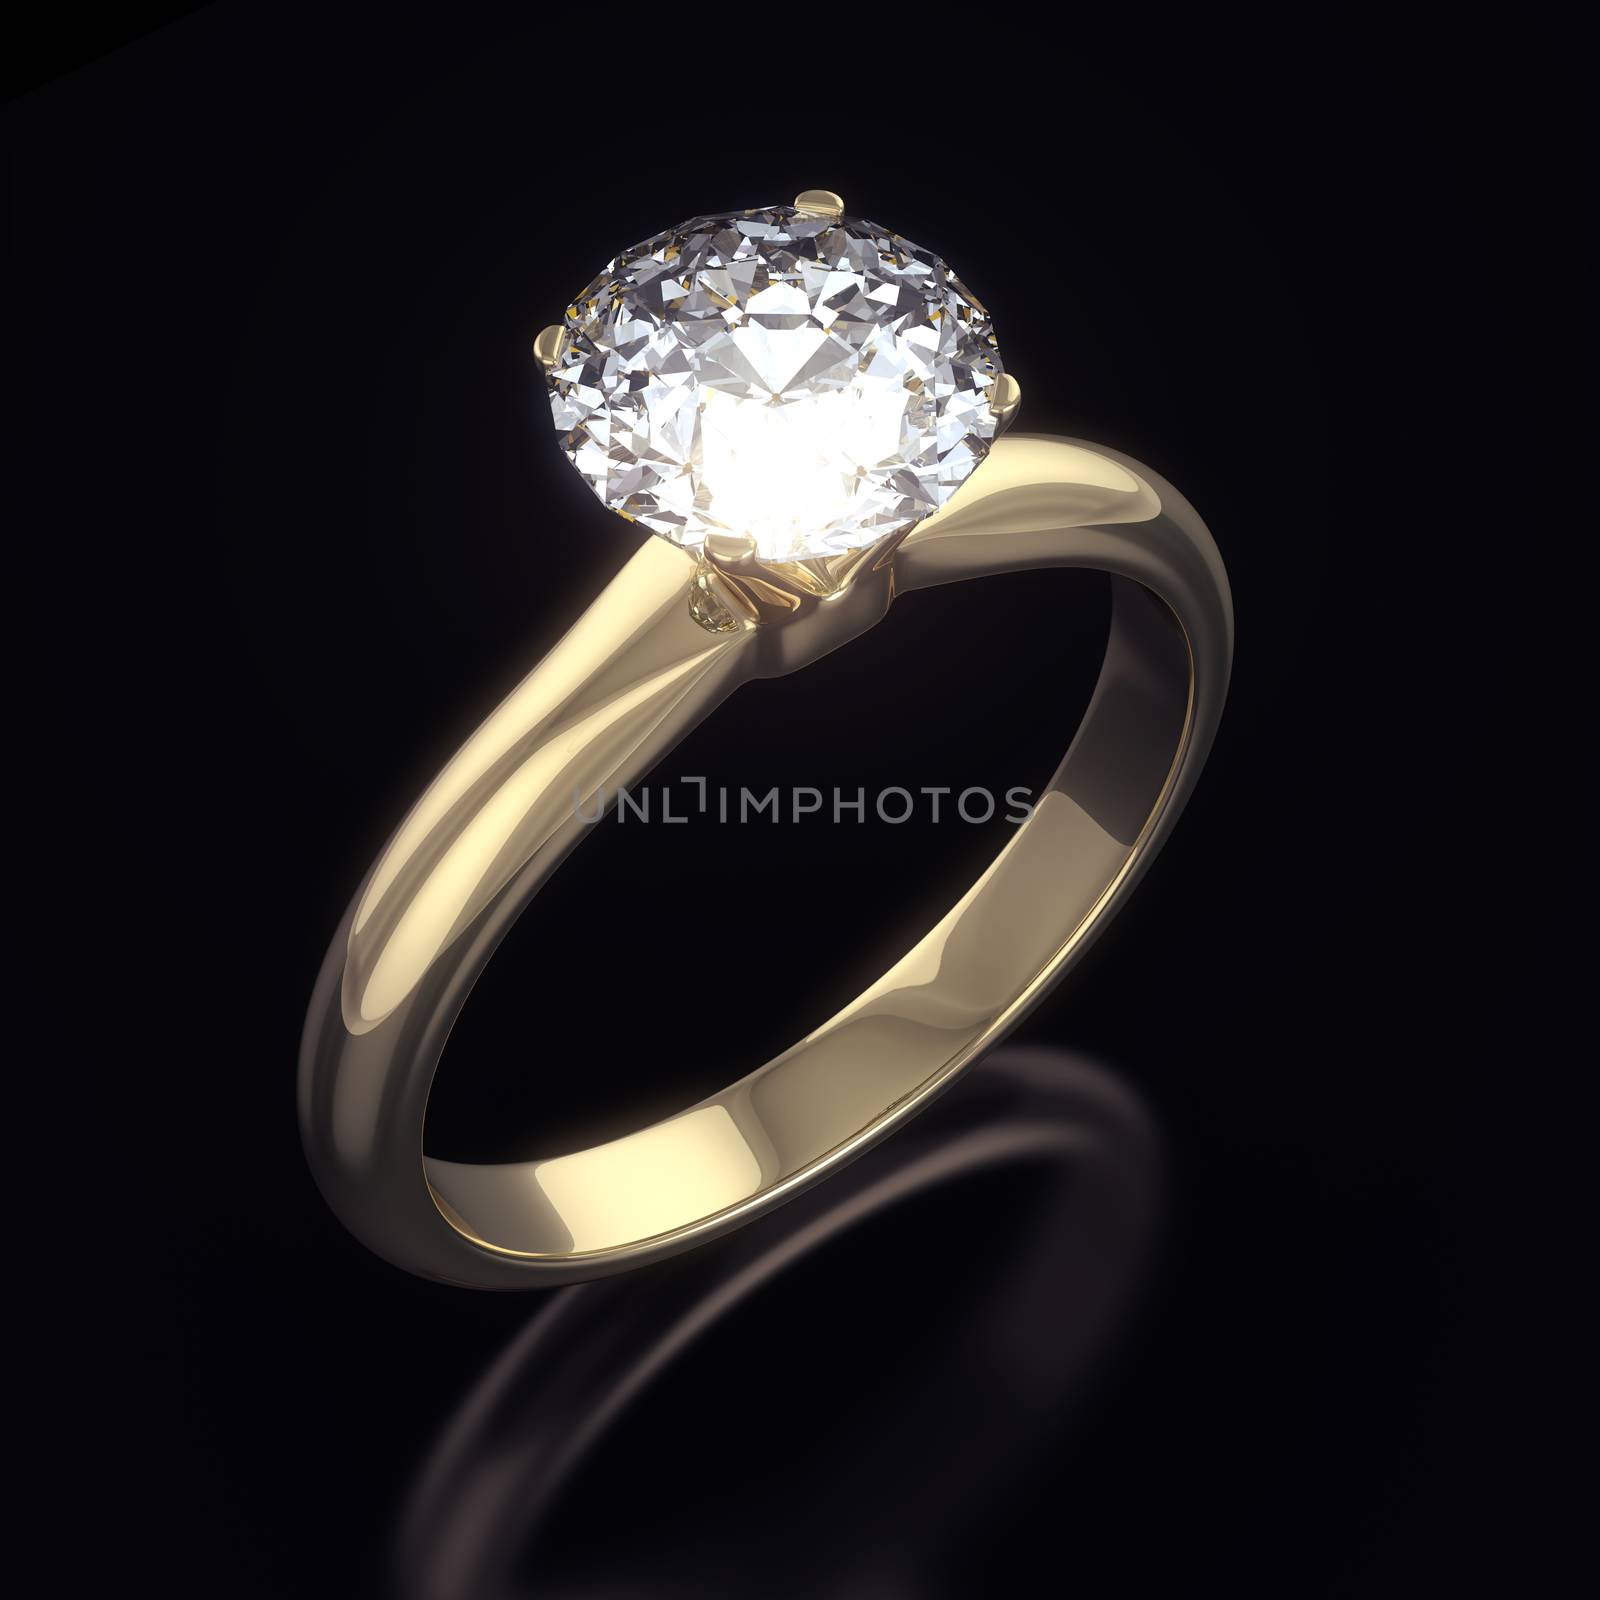 Diamond ring isolated with clipping path